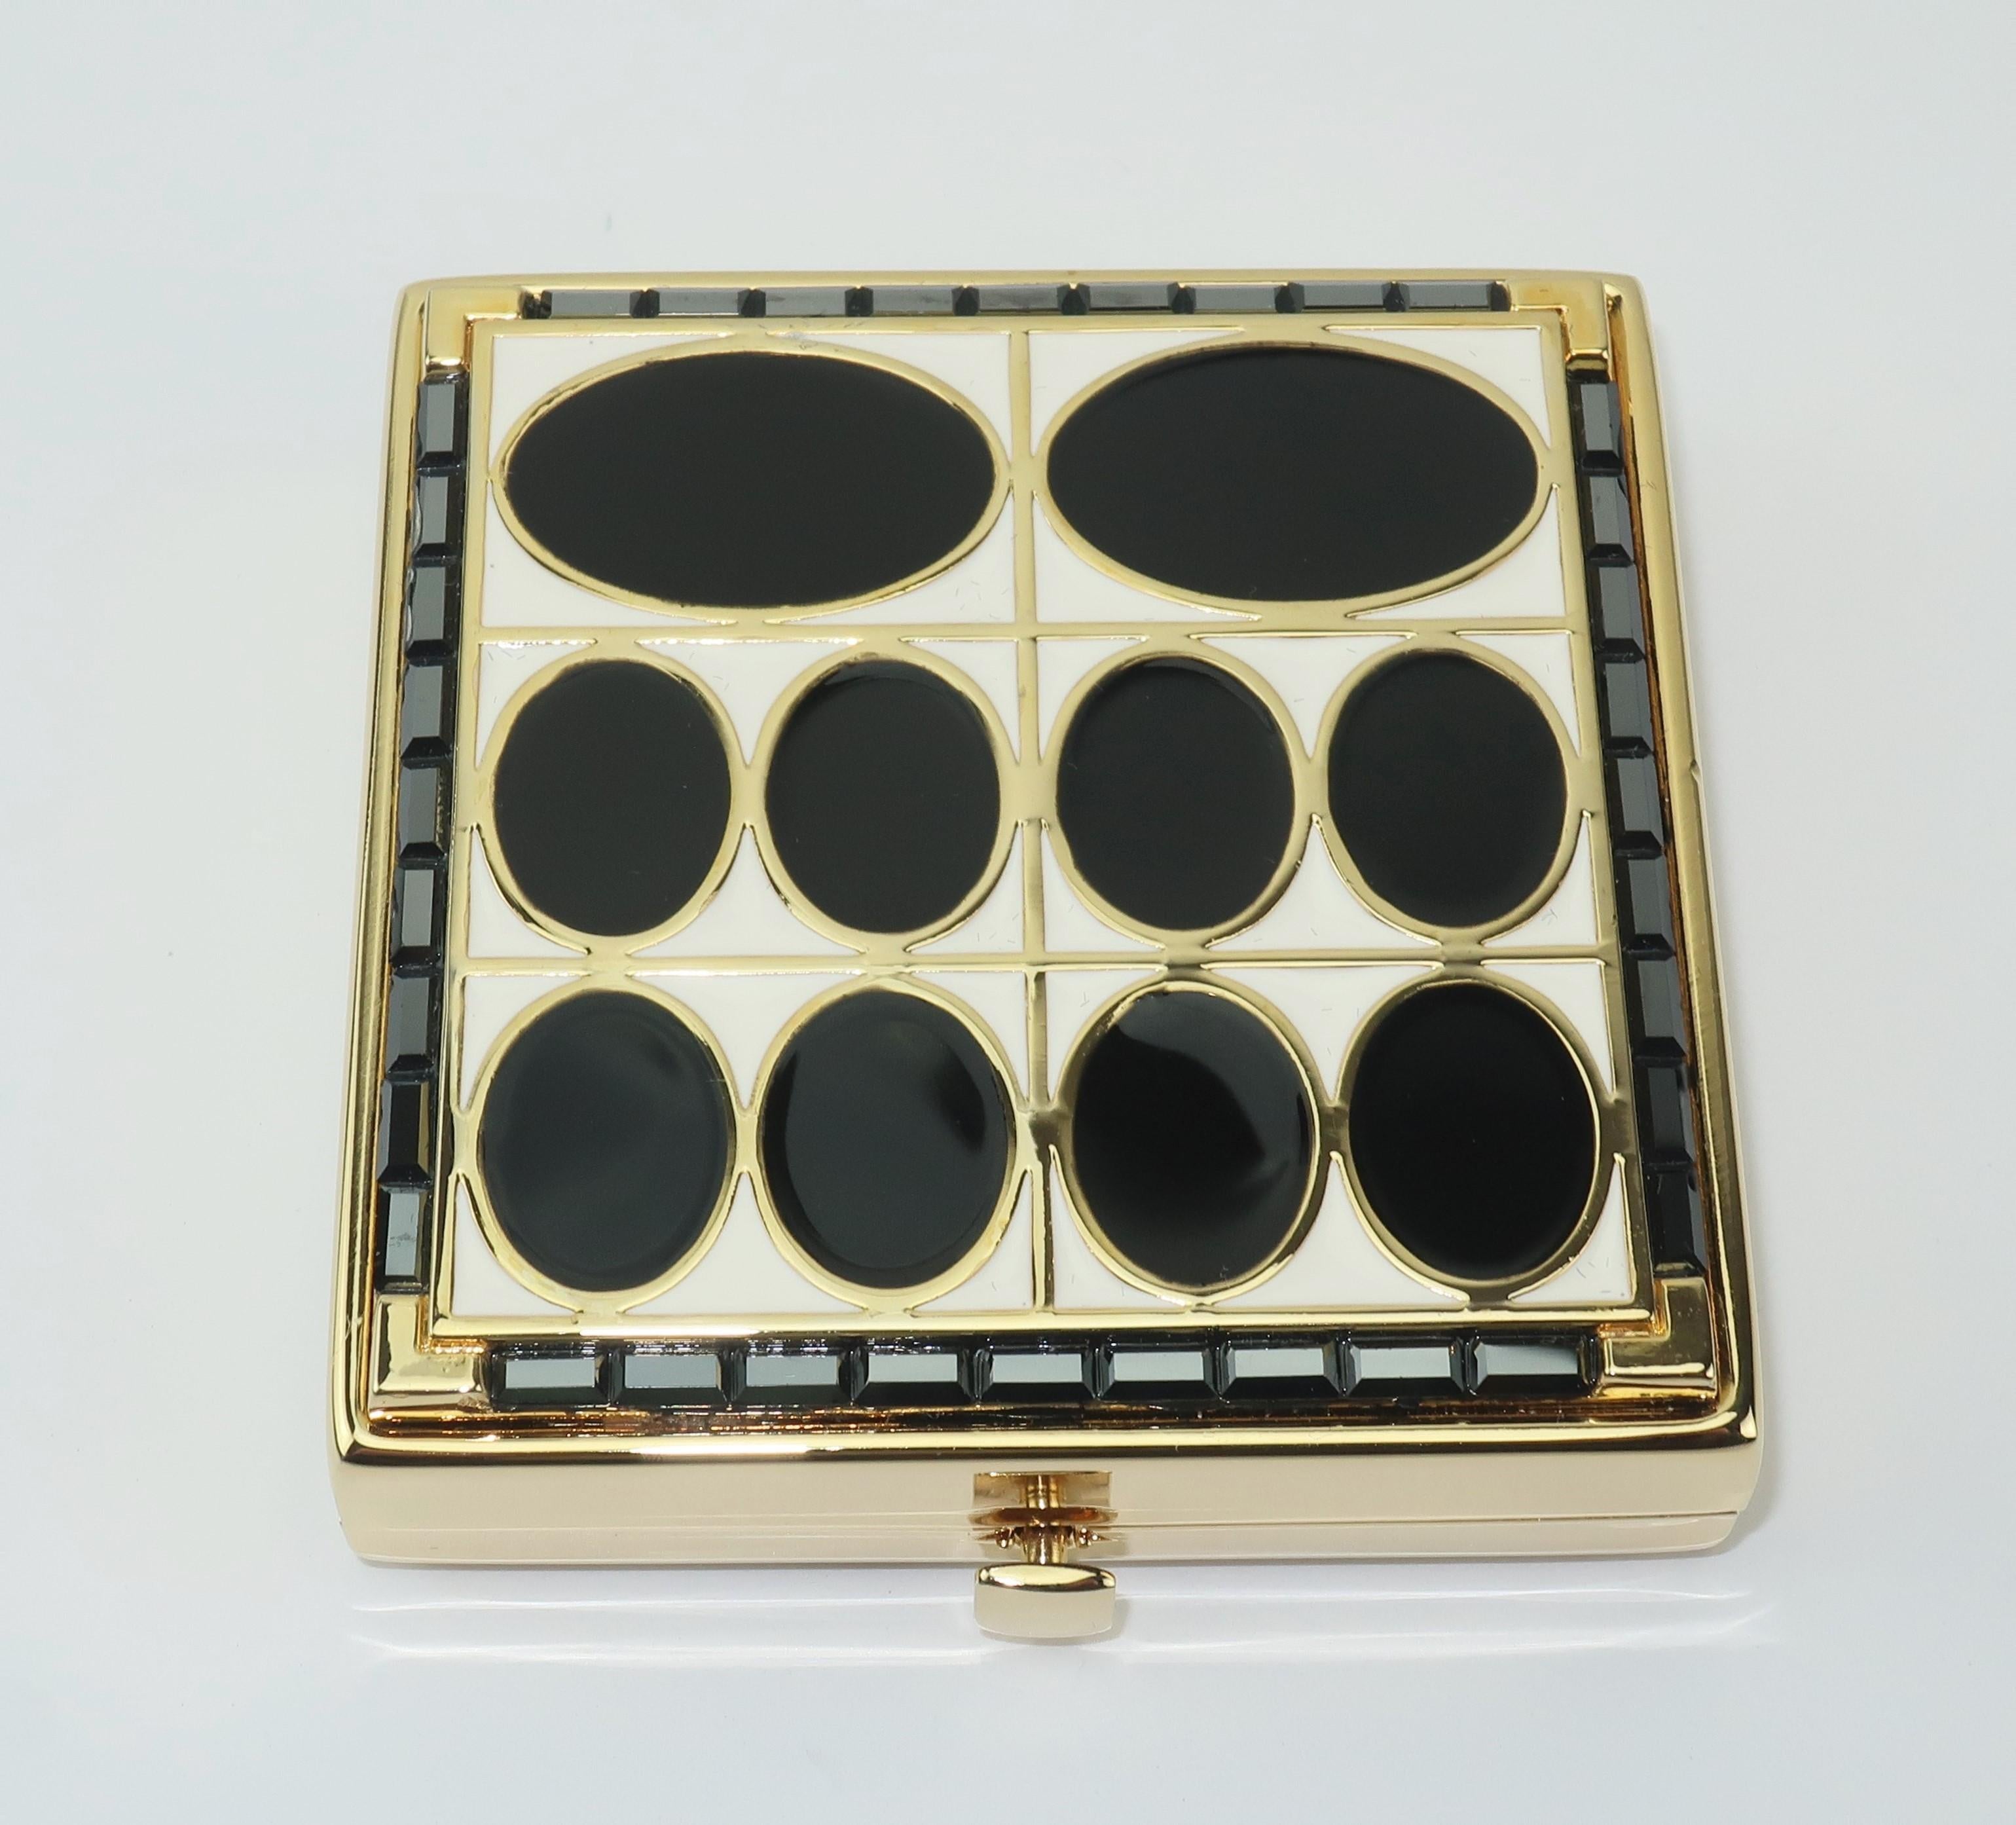 A collectible powder compact from Estee Lauder with an Art Deco motif in black and white enamel accented with black (almost gunmetal) rhinestones in a jewelry quality gold tone metal.  The push button closure opens to reveal a mirror and a